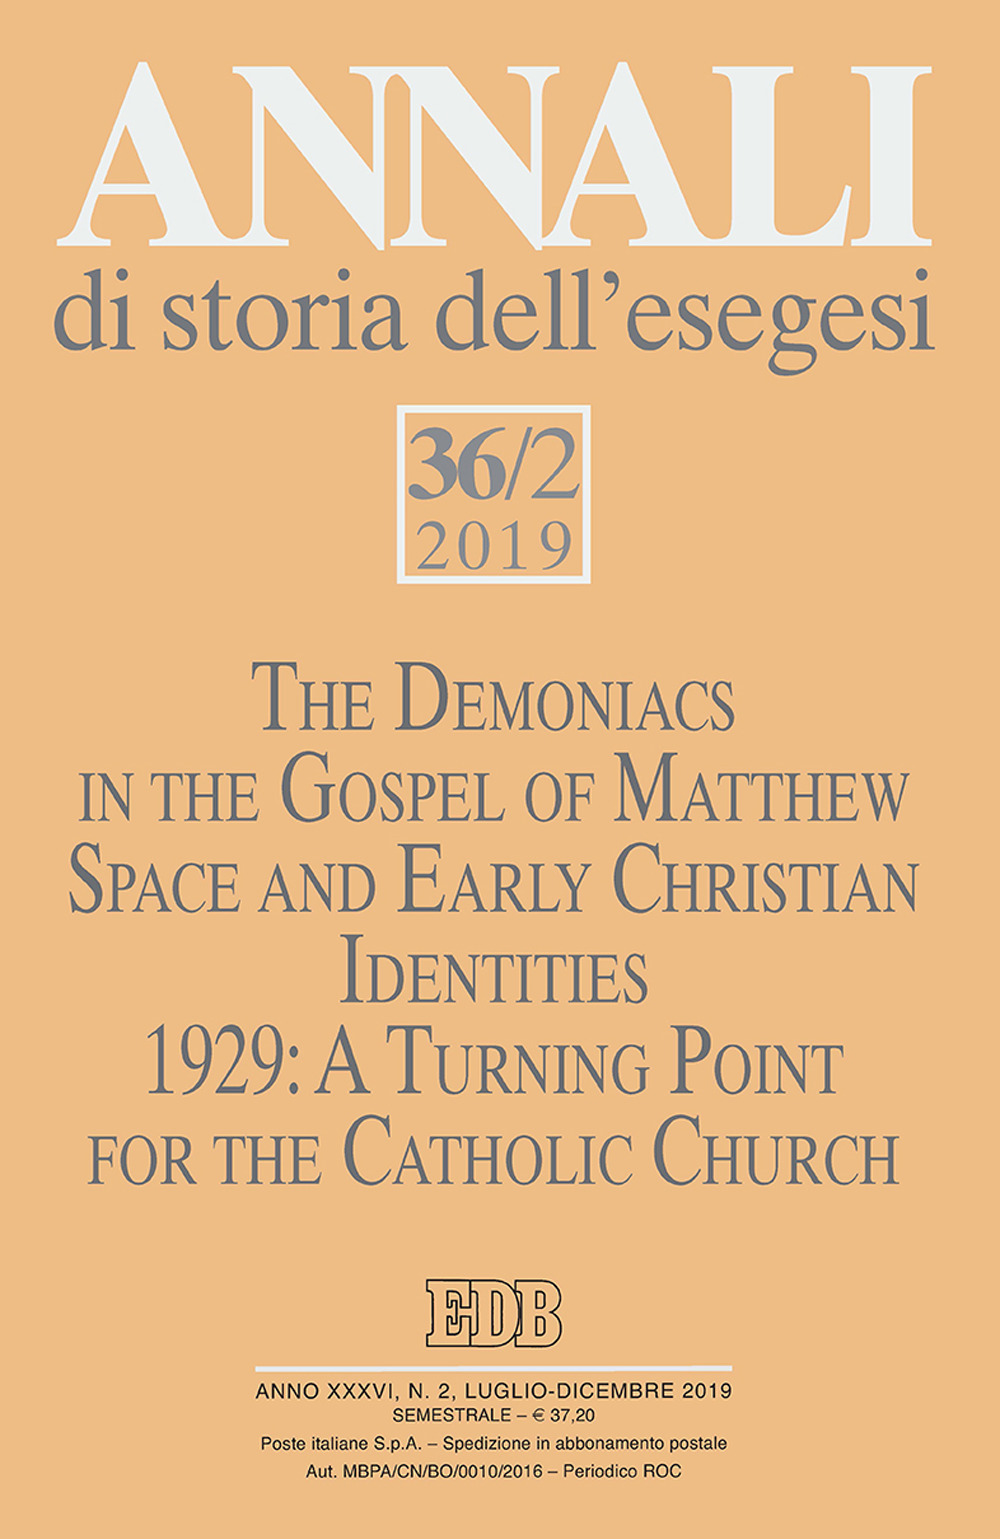 Annali di storia dell'esegesi (2019). Vol. 36/2: The Demoniacs in the Gospel of Mattew. Space and Early Christian Identities. 1929: A Turing Point for the Catholic Church